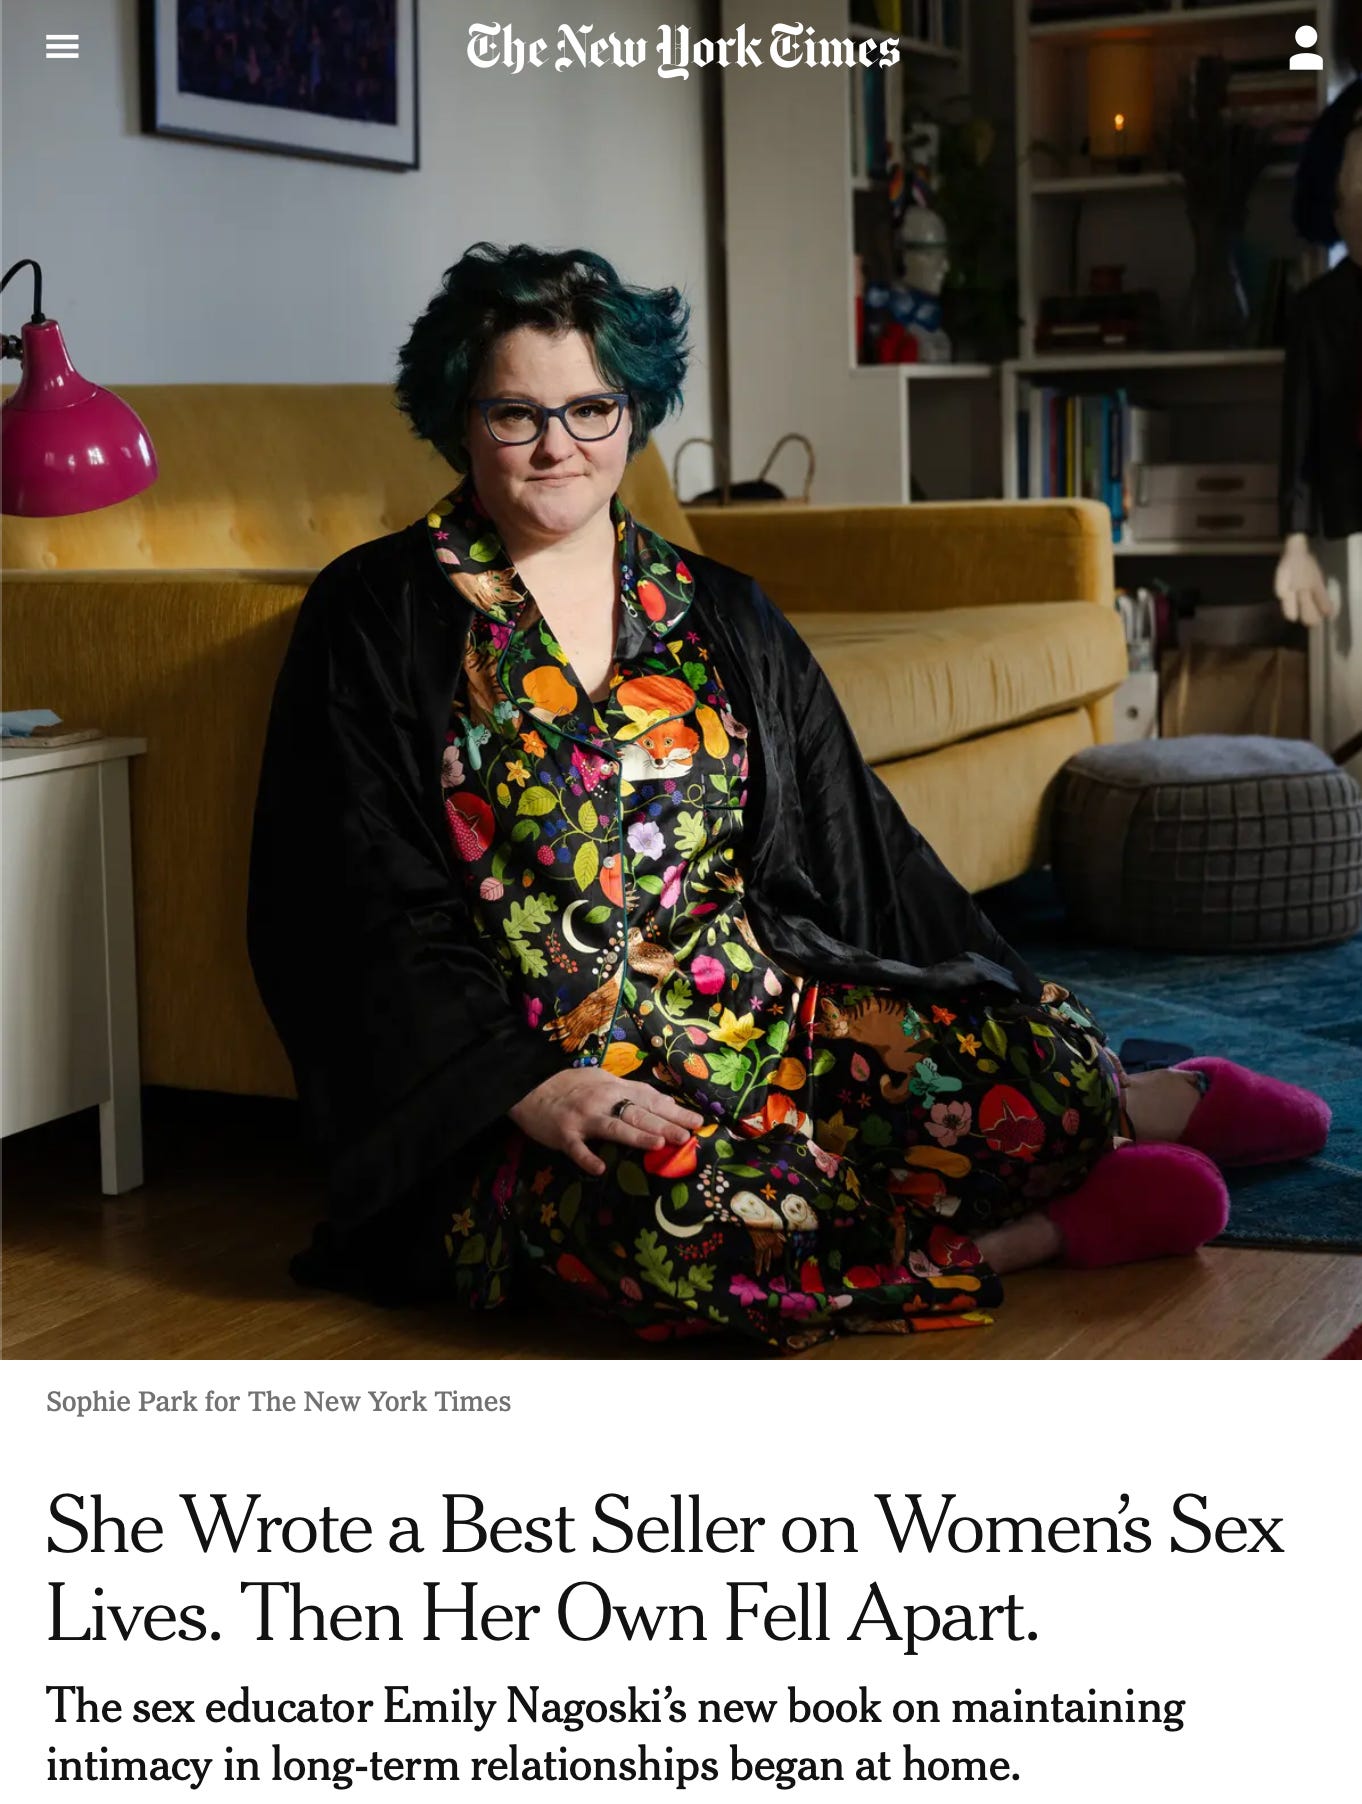 Emily being super cool in silk pajamas in the New York Times